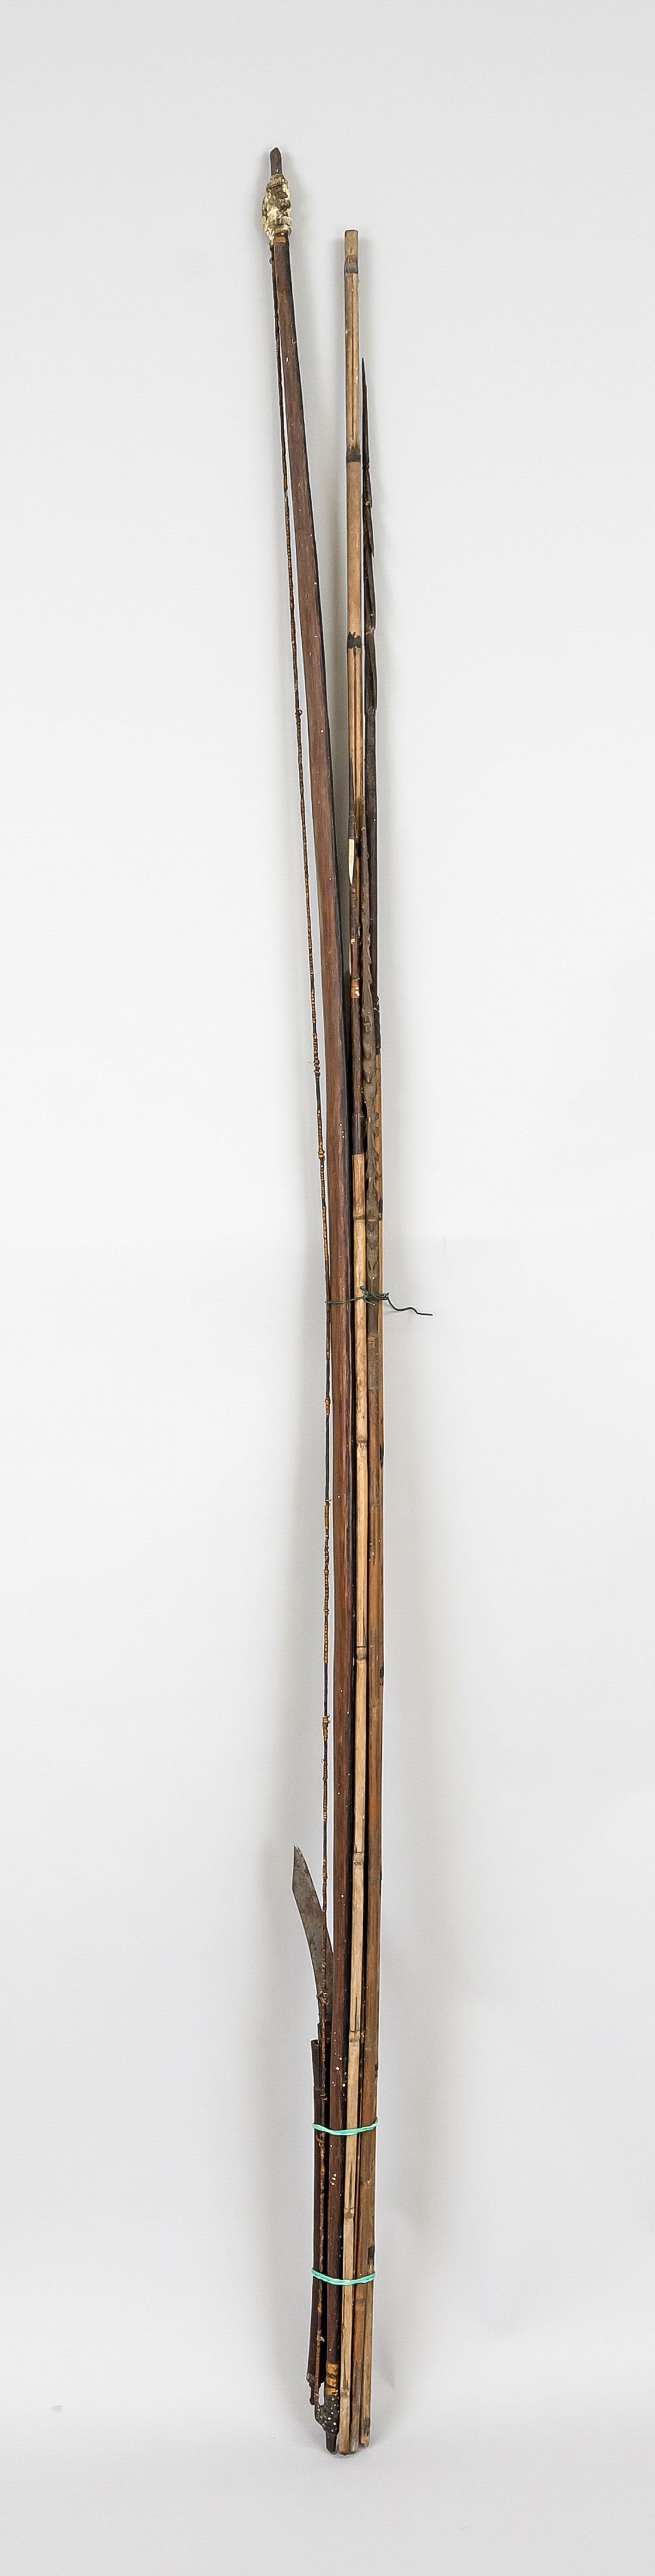 Mixed Arms Oceania, probably 19th century A bamboo spear with wooden tip, a bow with 5 arrows, the